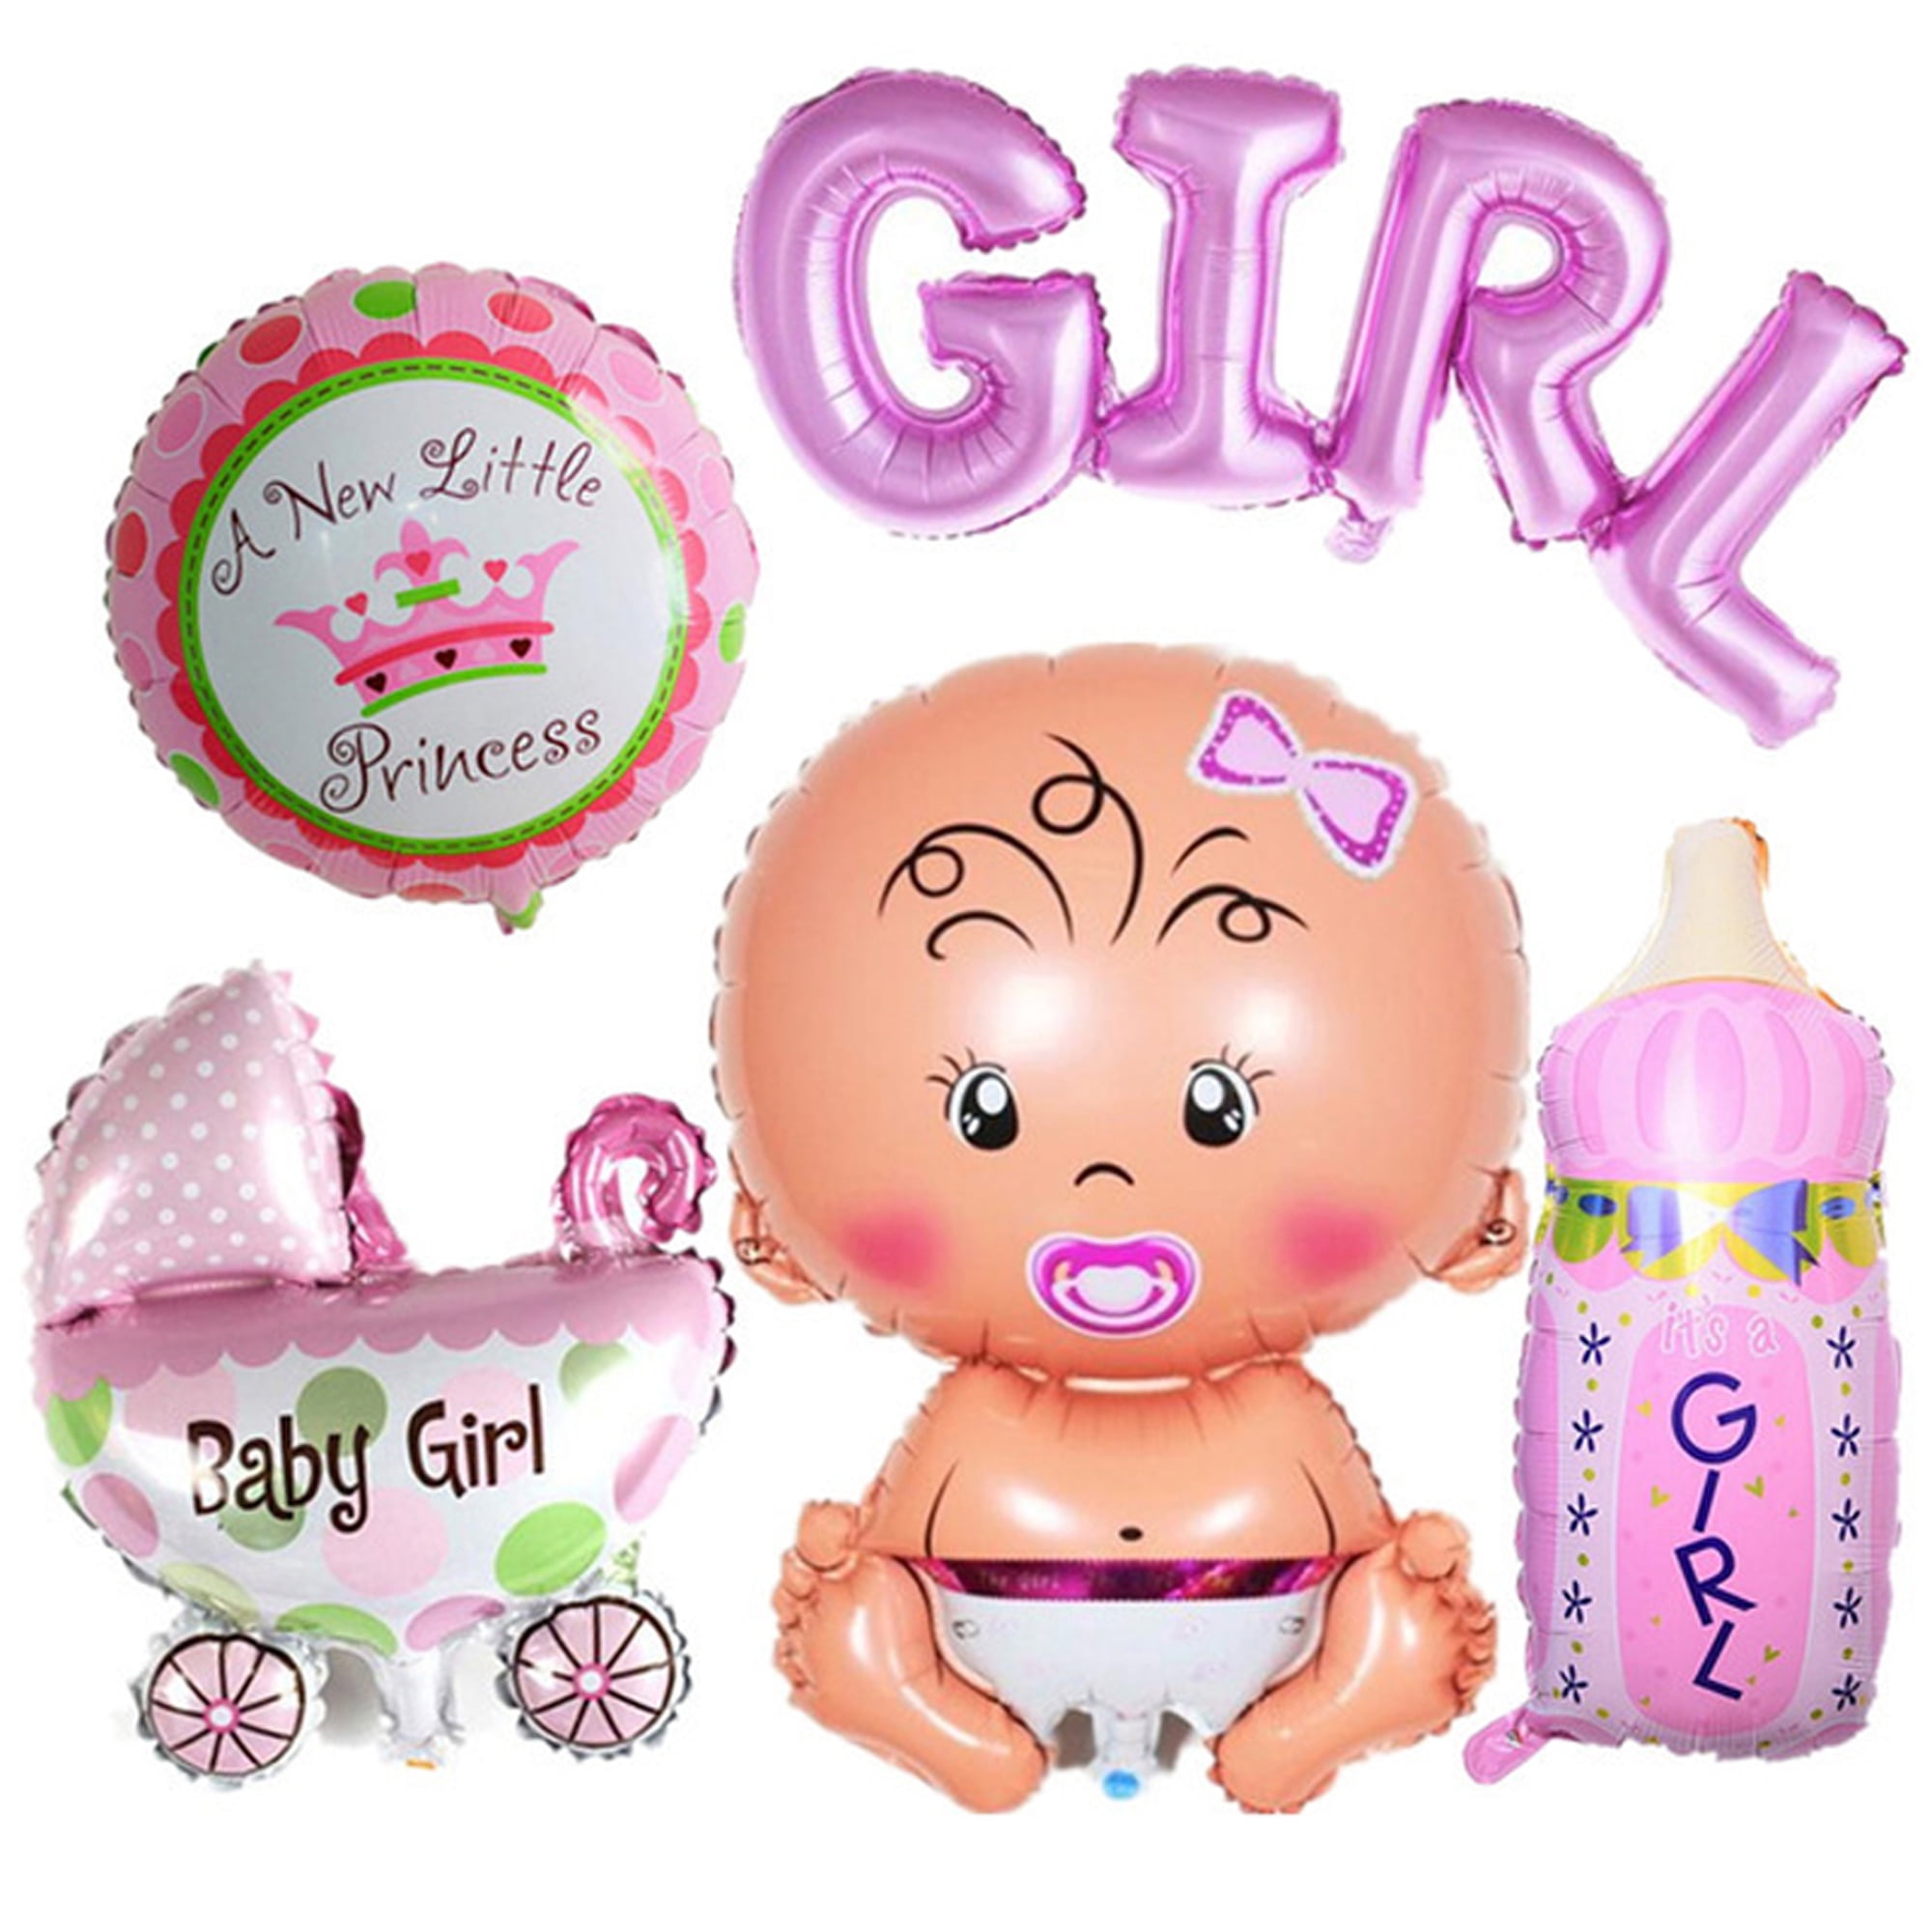 Details about  / 7 pc Es Una Nina Stars /& Moon Balloon Bouquet Party Decoration Welcome Pink Girl